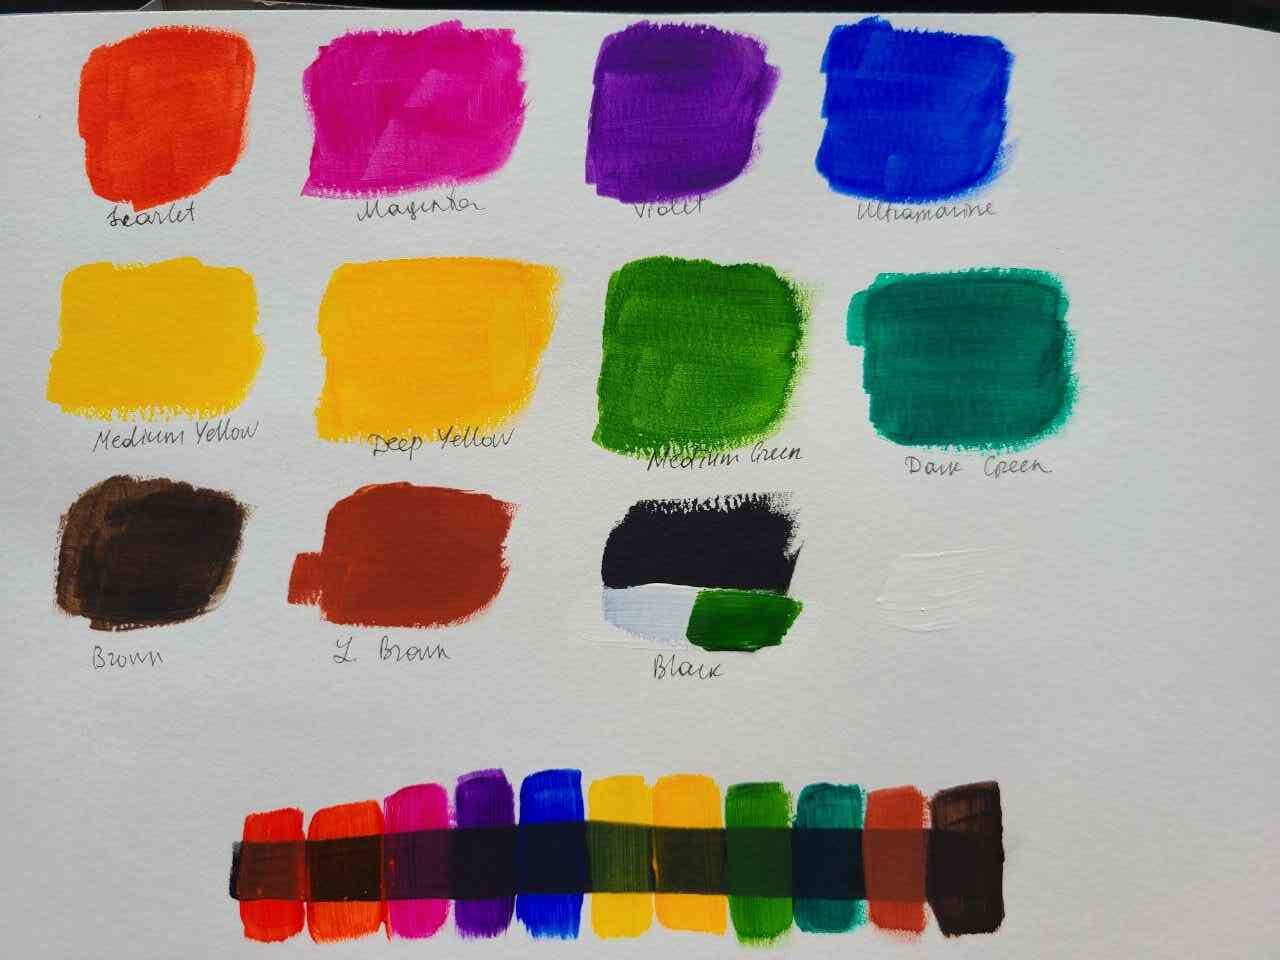 Daler Rowney Acrylic Paint review finish